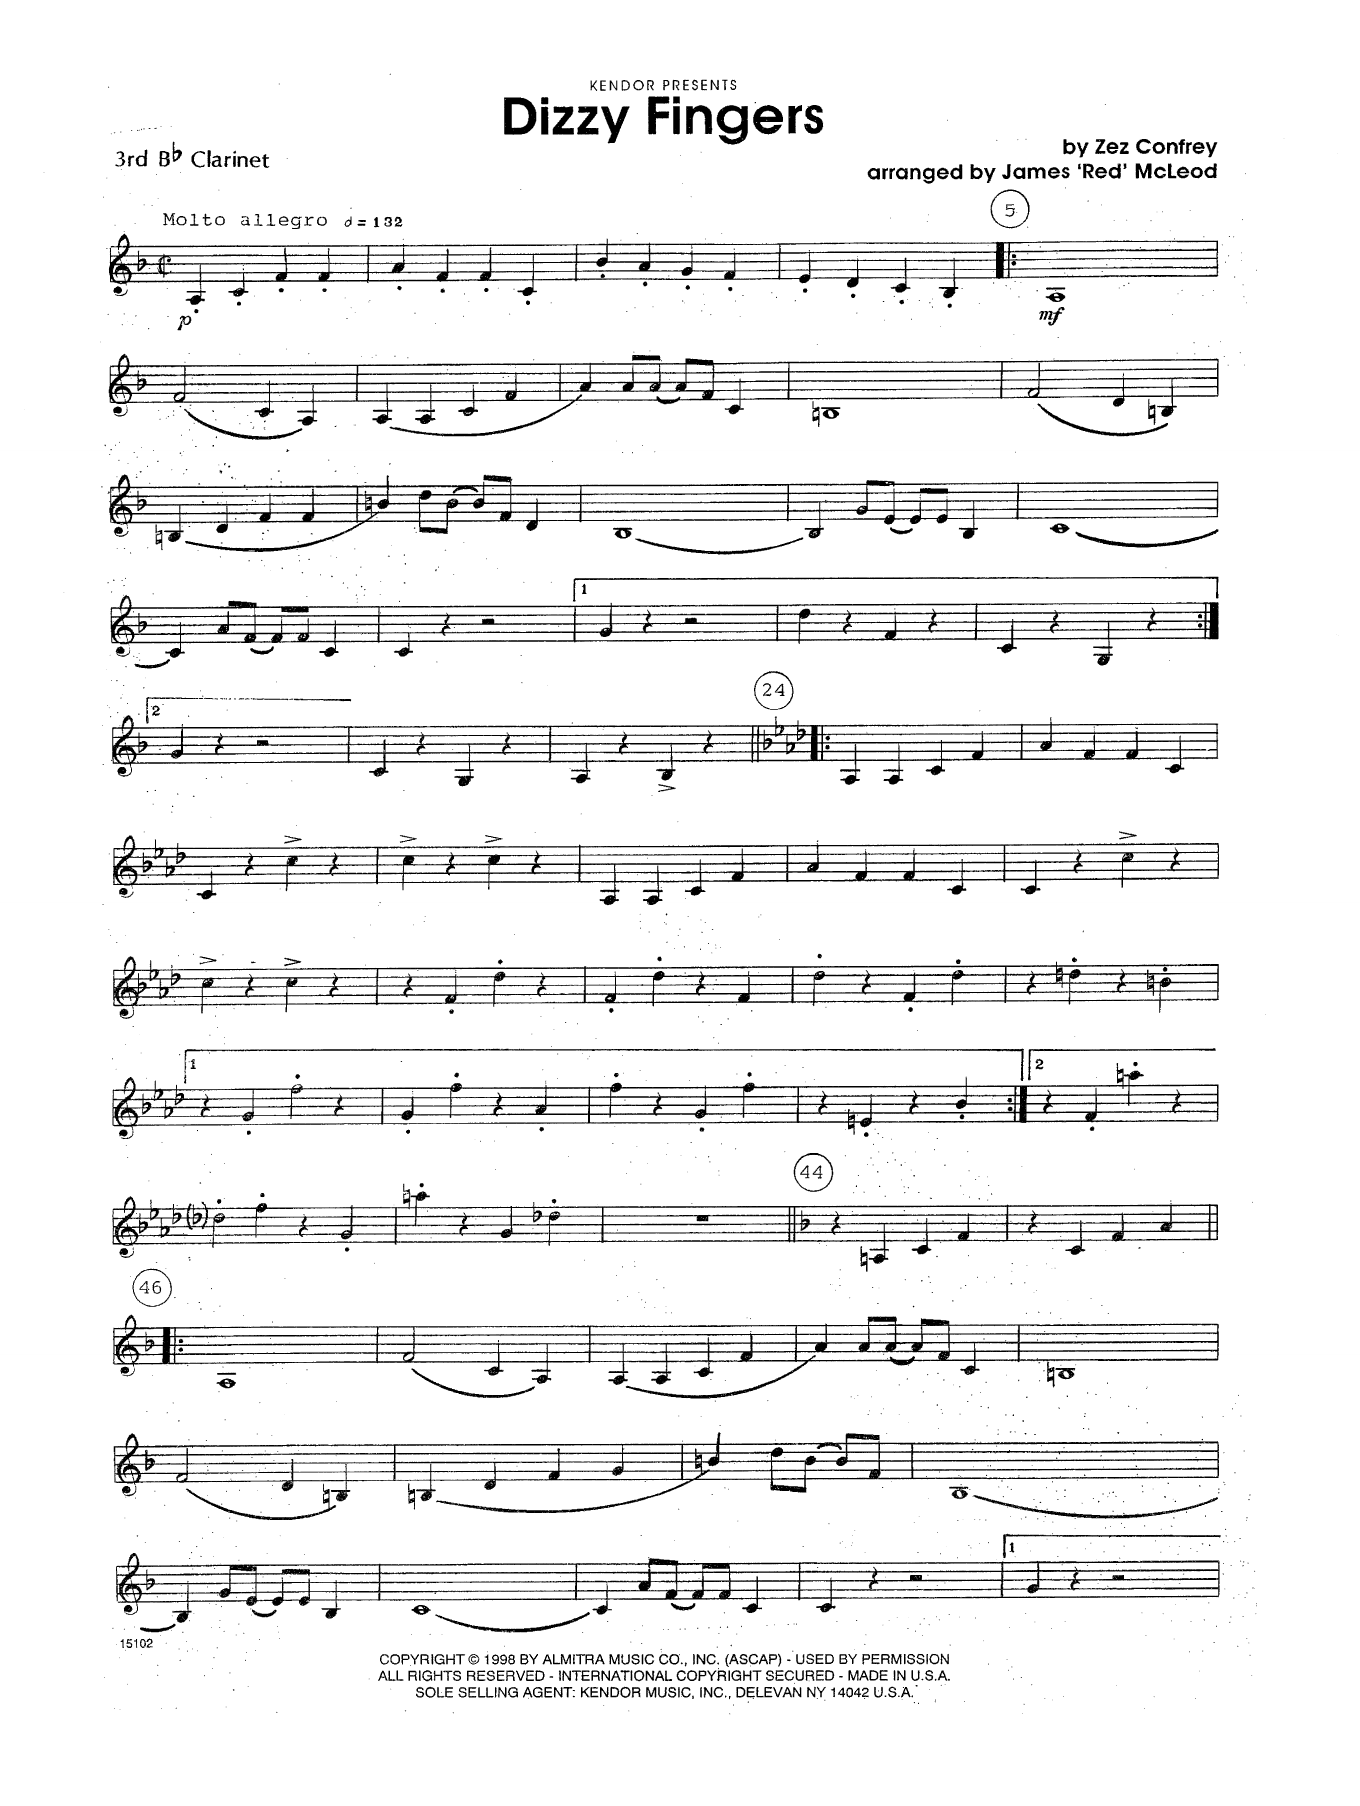 Download James 'Red' McLeod Dizzy Fingers - 3rd Bb Clarinet Sheet Music